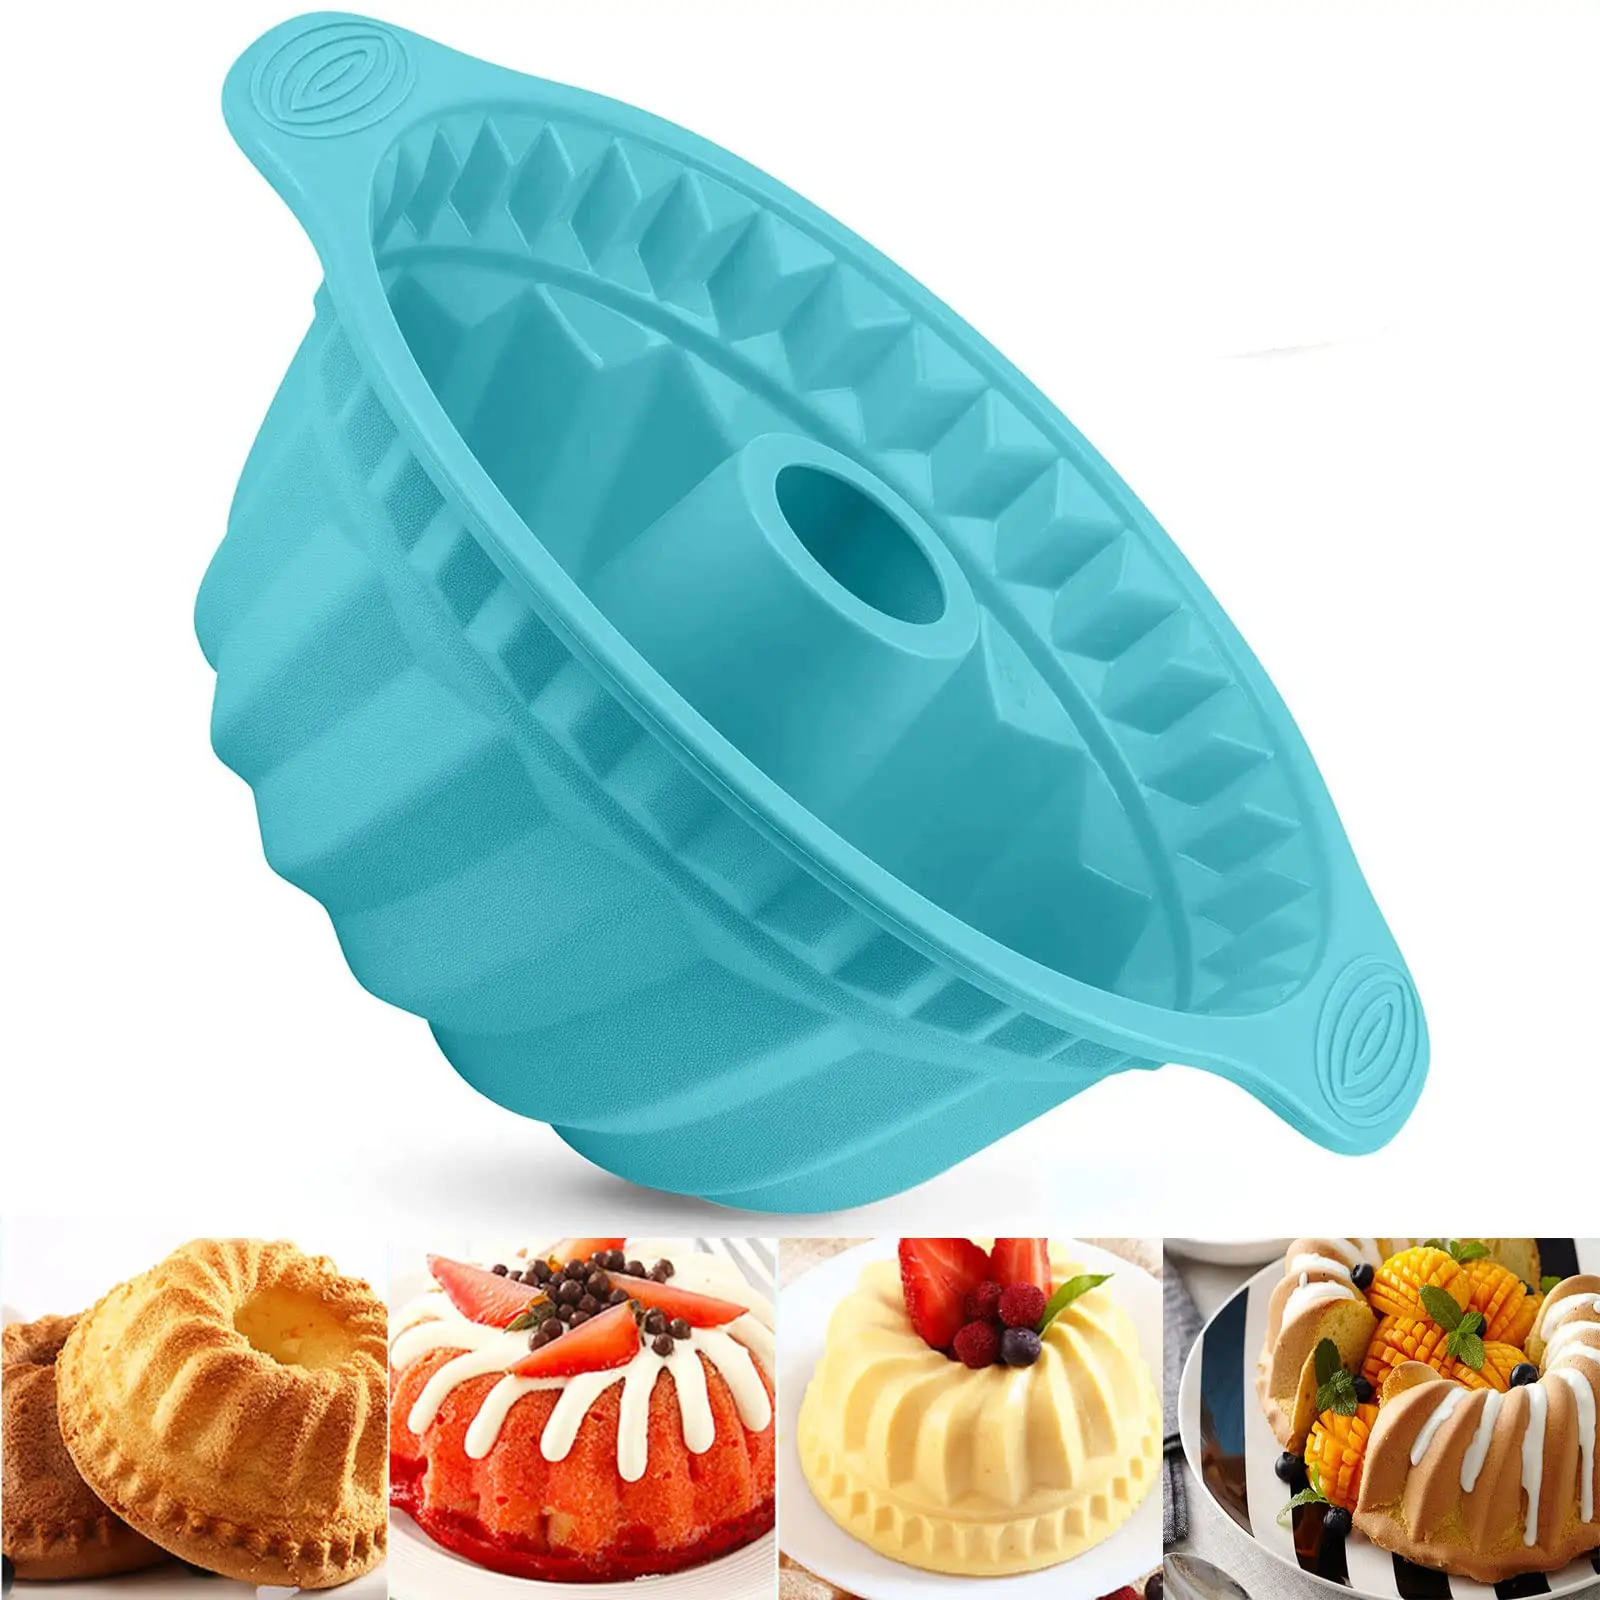 

New 3D Shape Silicone Cake Mold DIY Pastry Baking Tools for Cake Pan Kitchen Fluted Tube Pan Bakeware Cake Decorating Tool